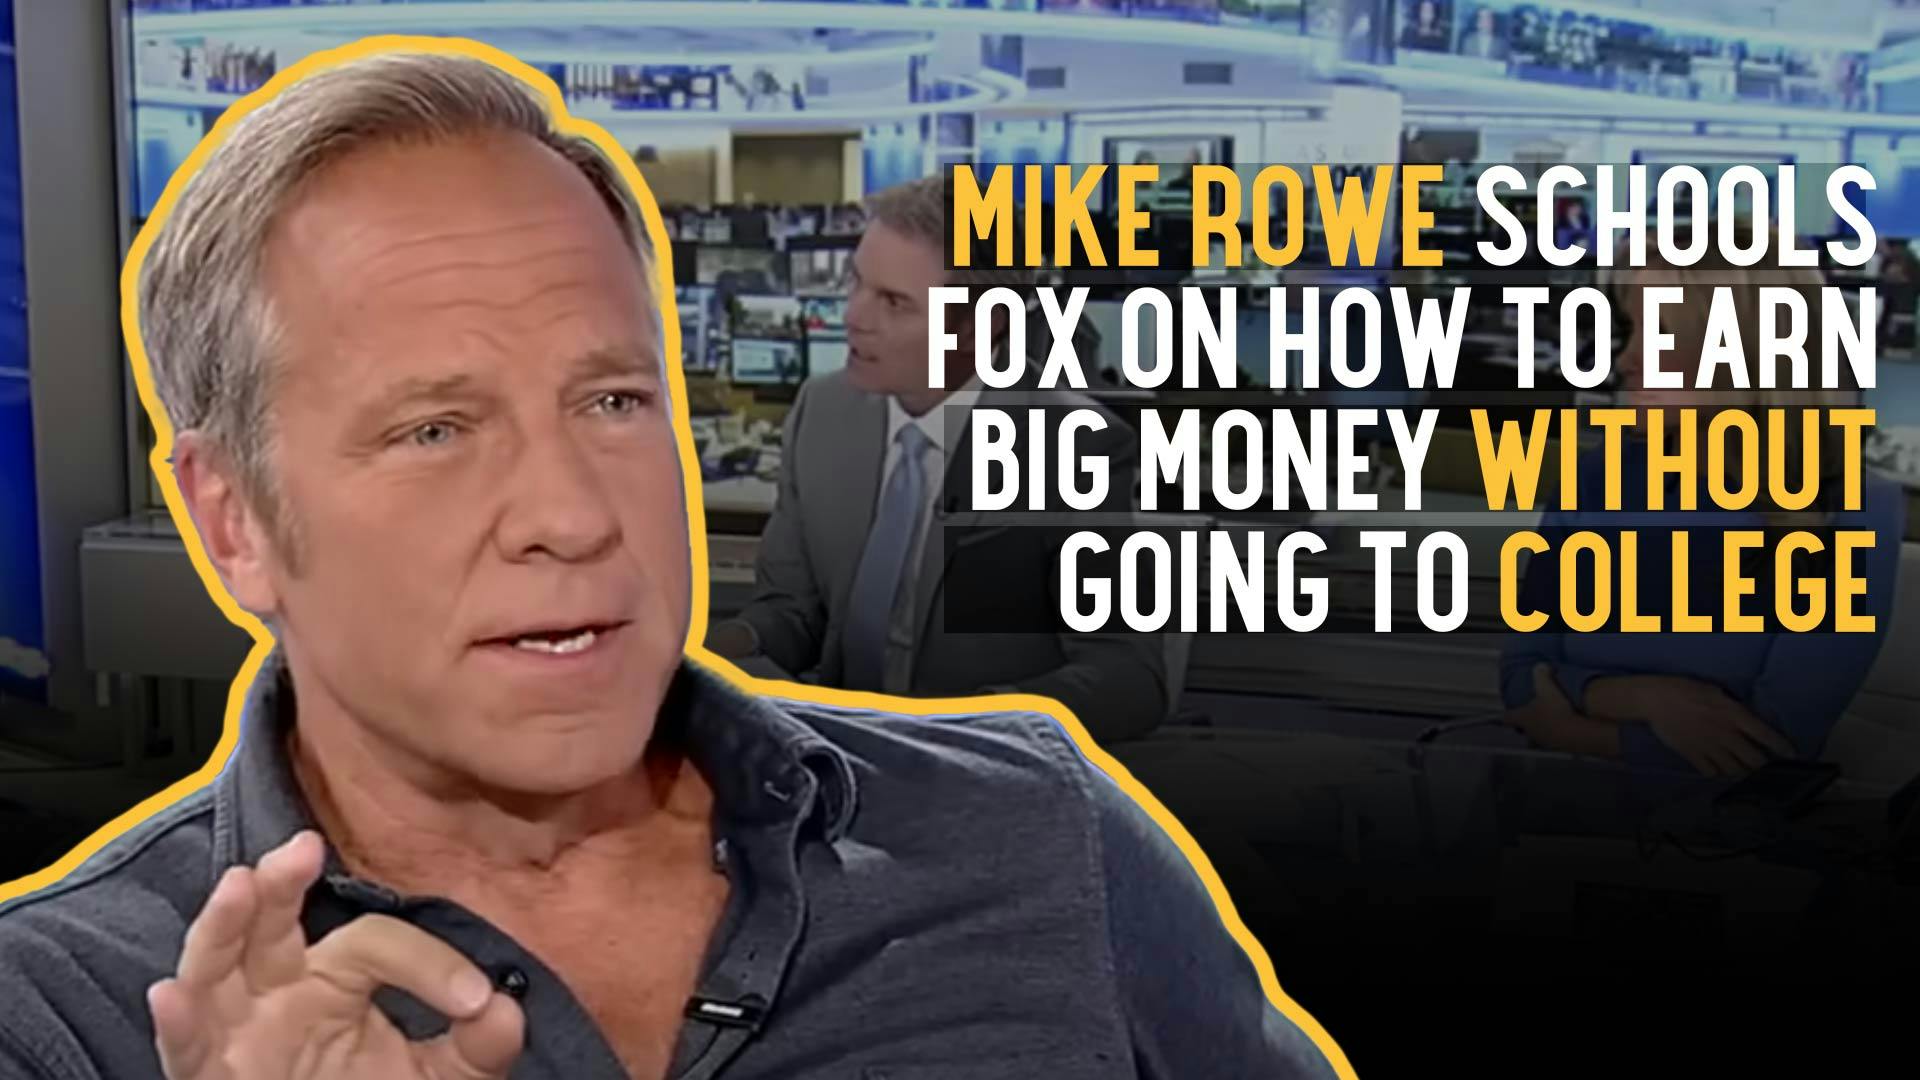 Mike Rowe Schools Fox on How to Earn Big Money without Going to College